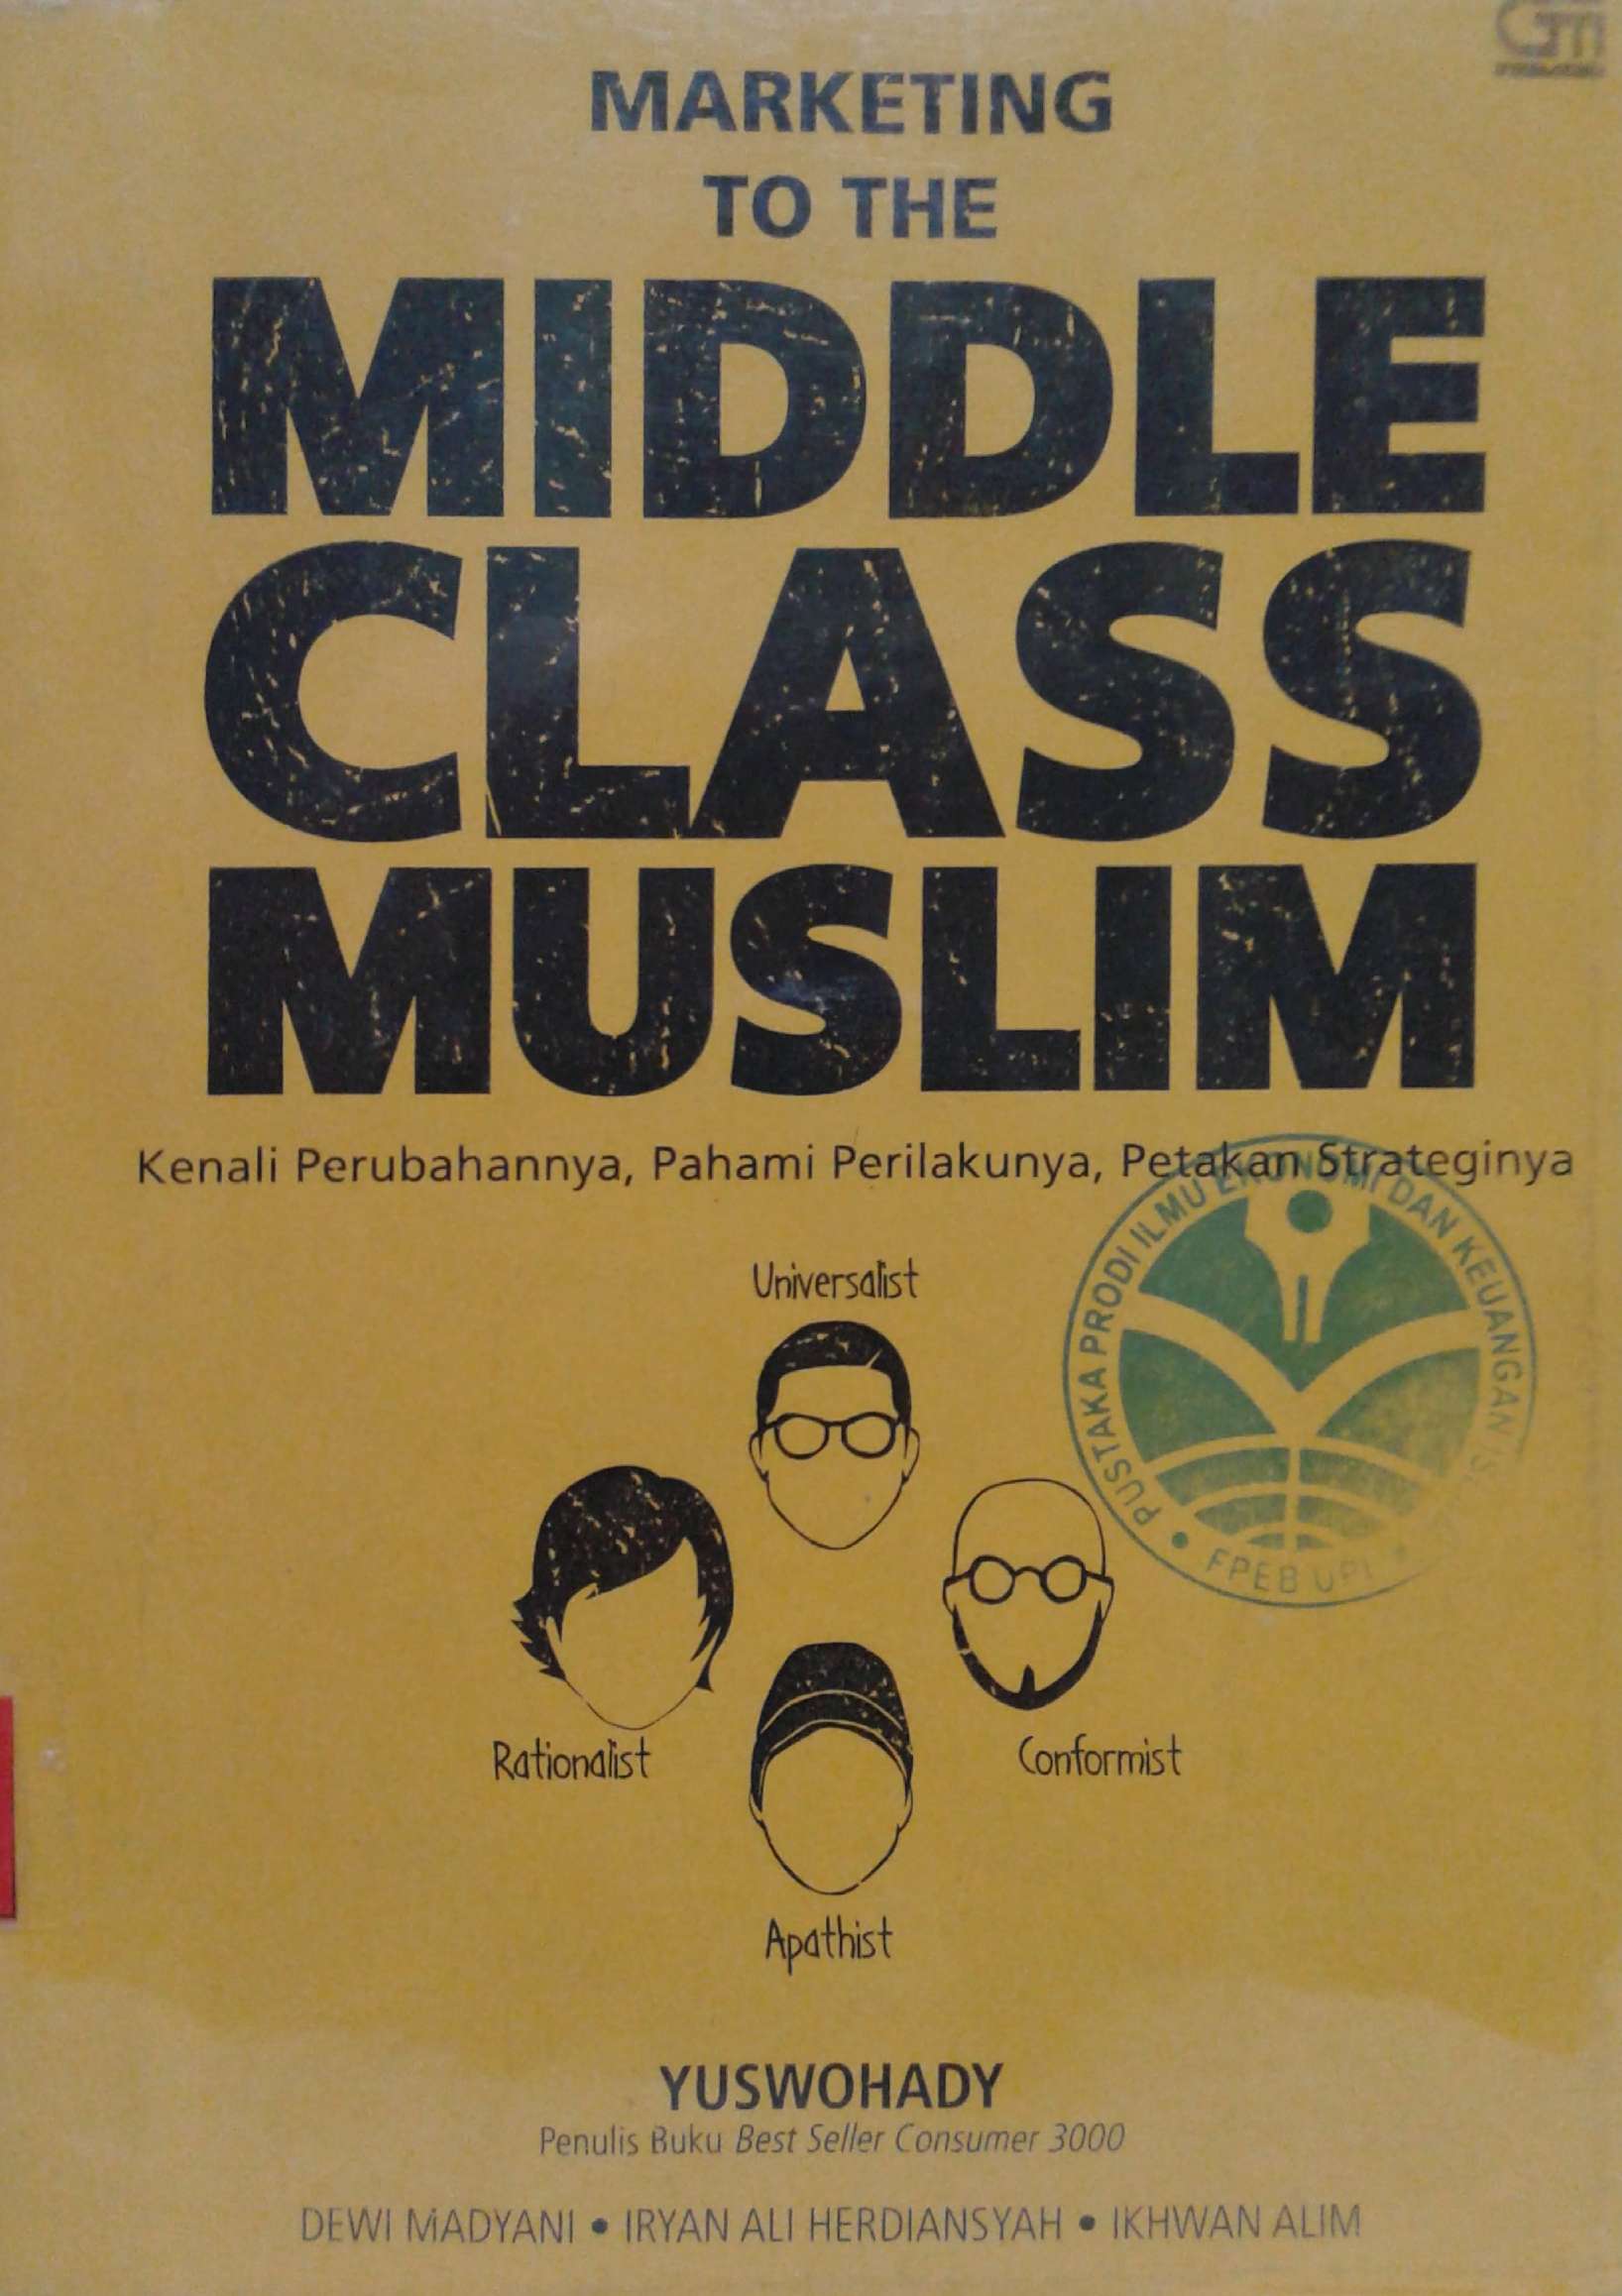 Marketing to The Middle Class Muslim